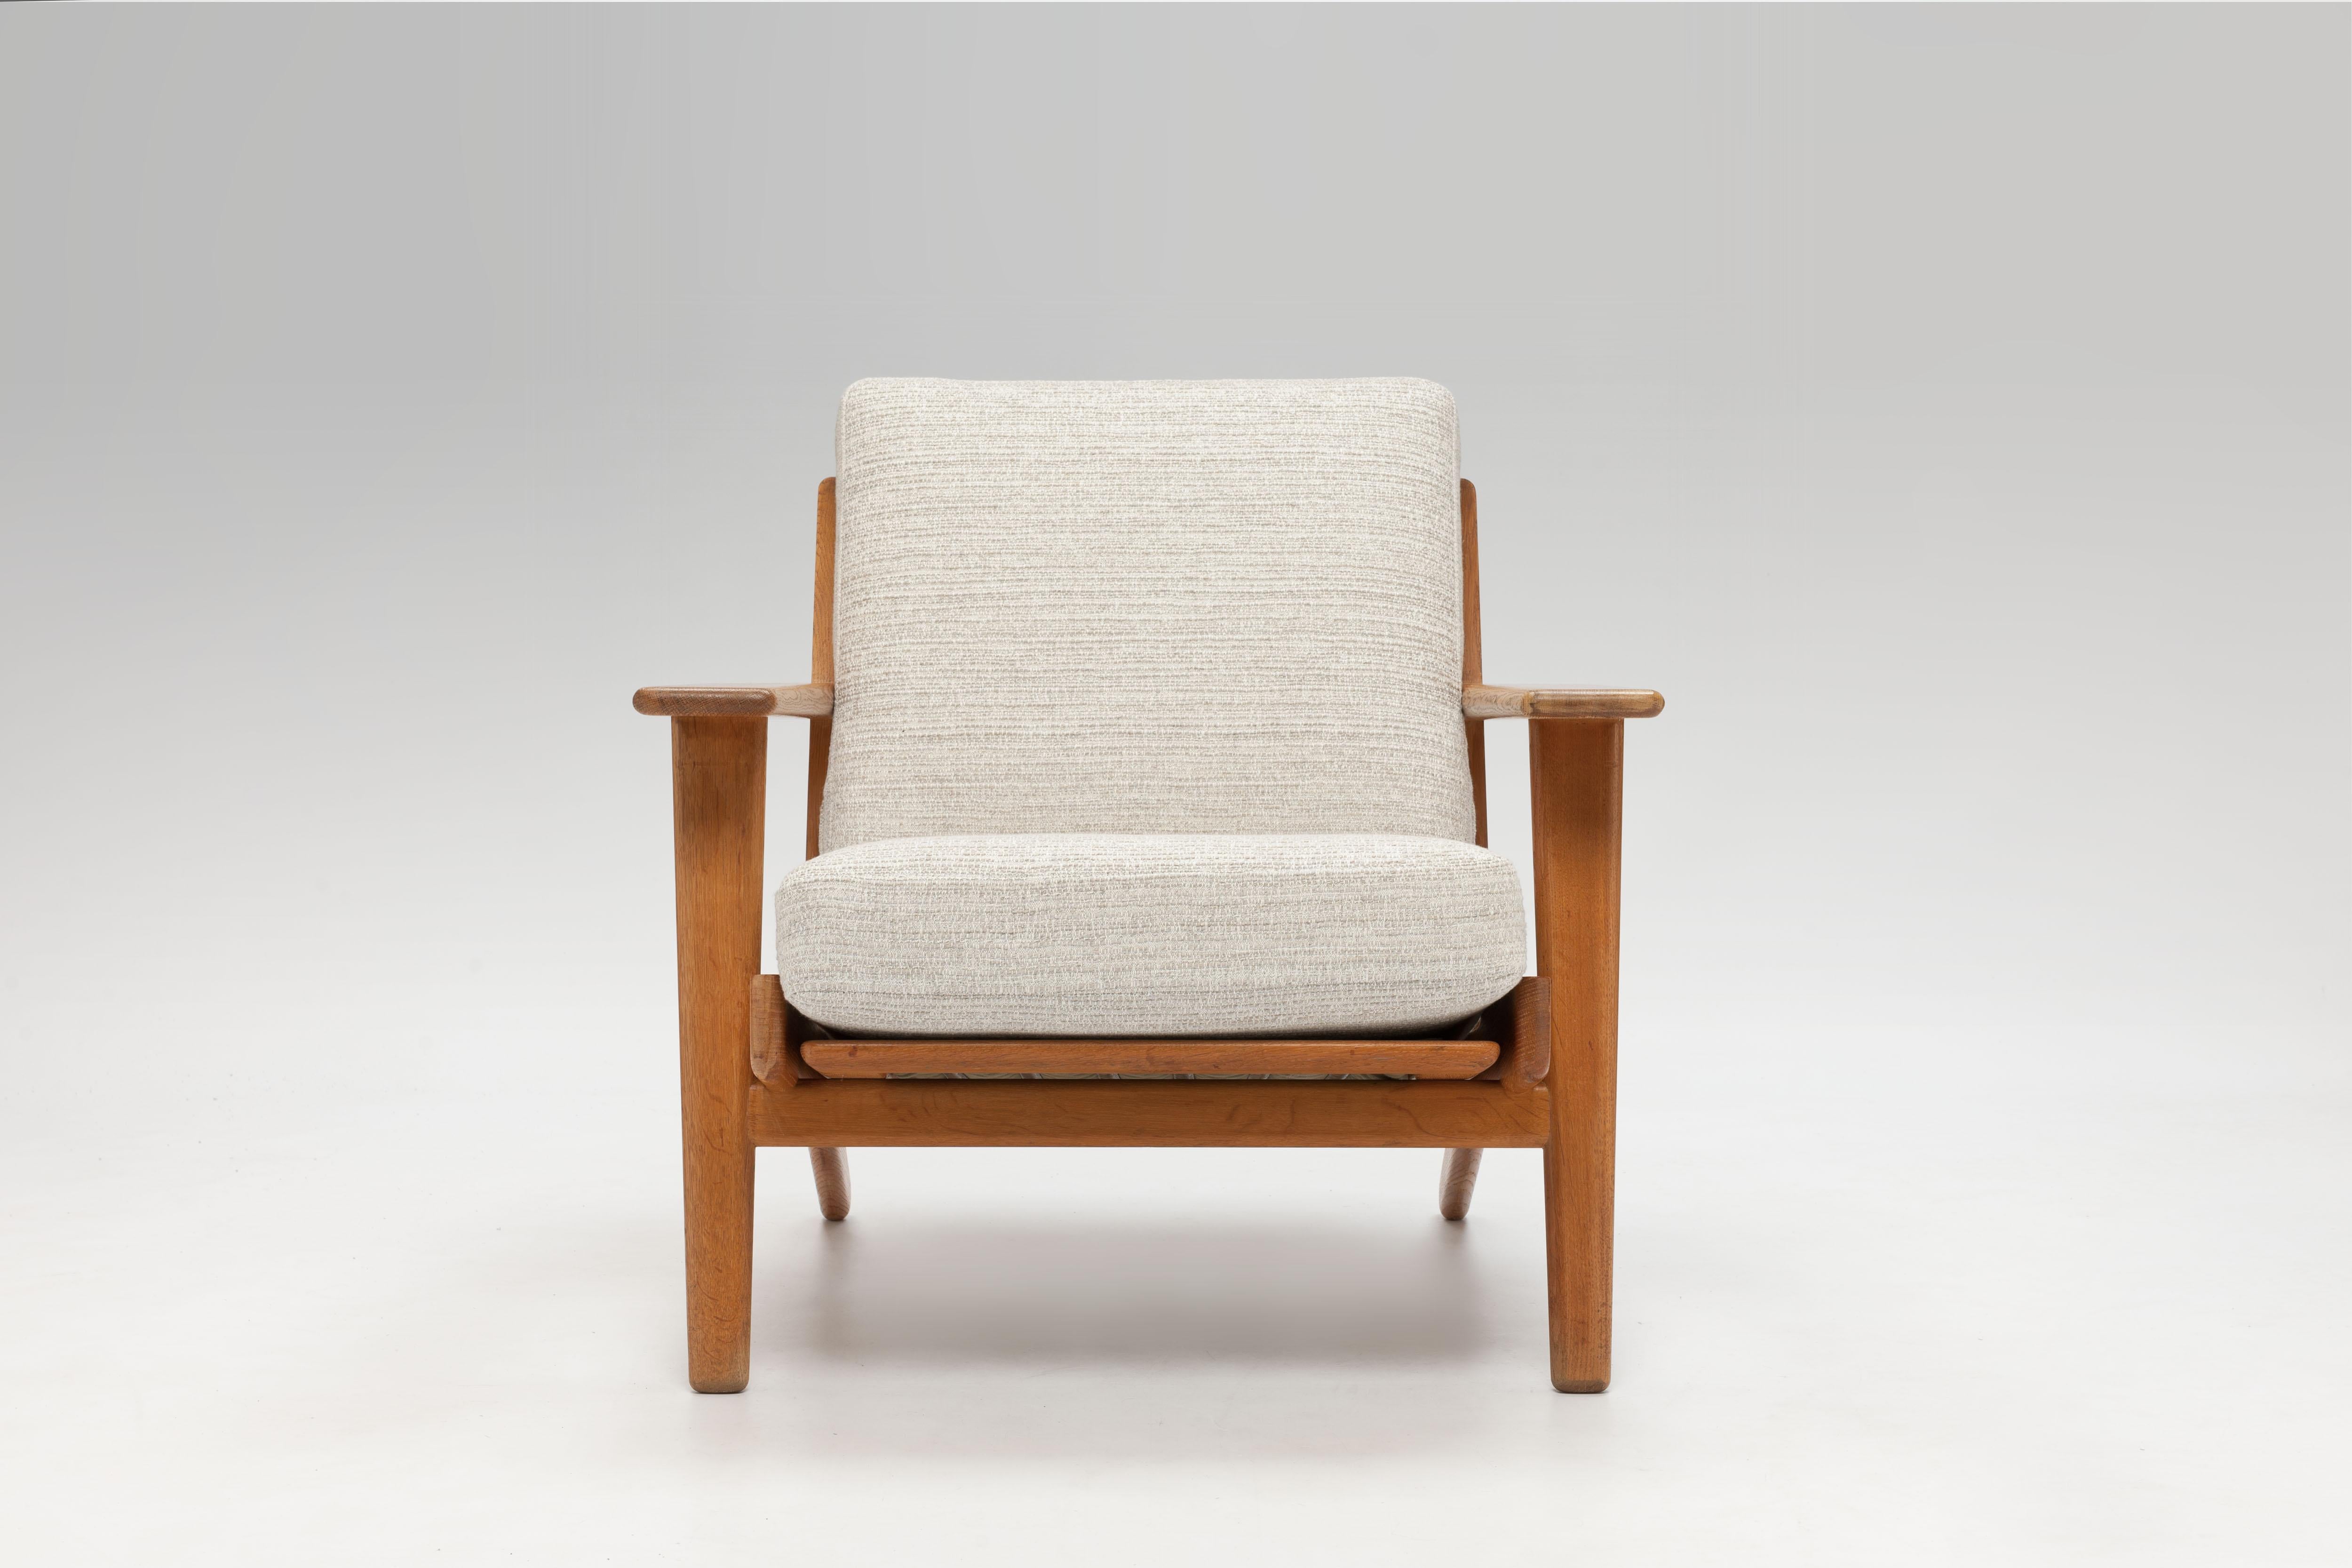 Lounge chair GE290 is a much appreciated early design by Hans Wegner. Wegner already designed the chair in 1953. The chair offers exceptional good seating comfort - partly due to cushions with innersprings - and much convenience is offered from the